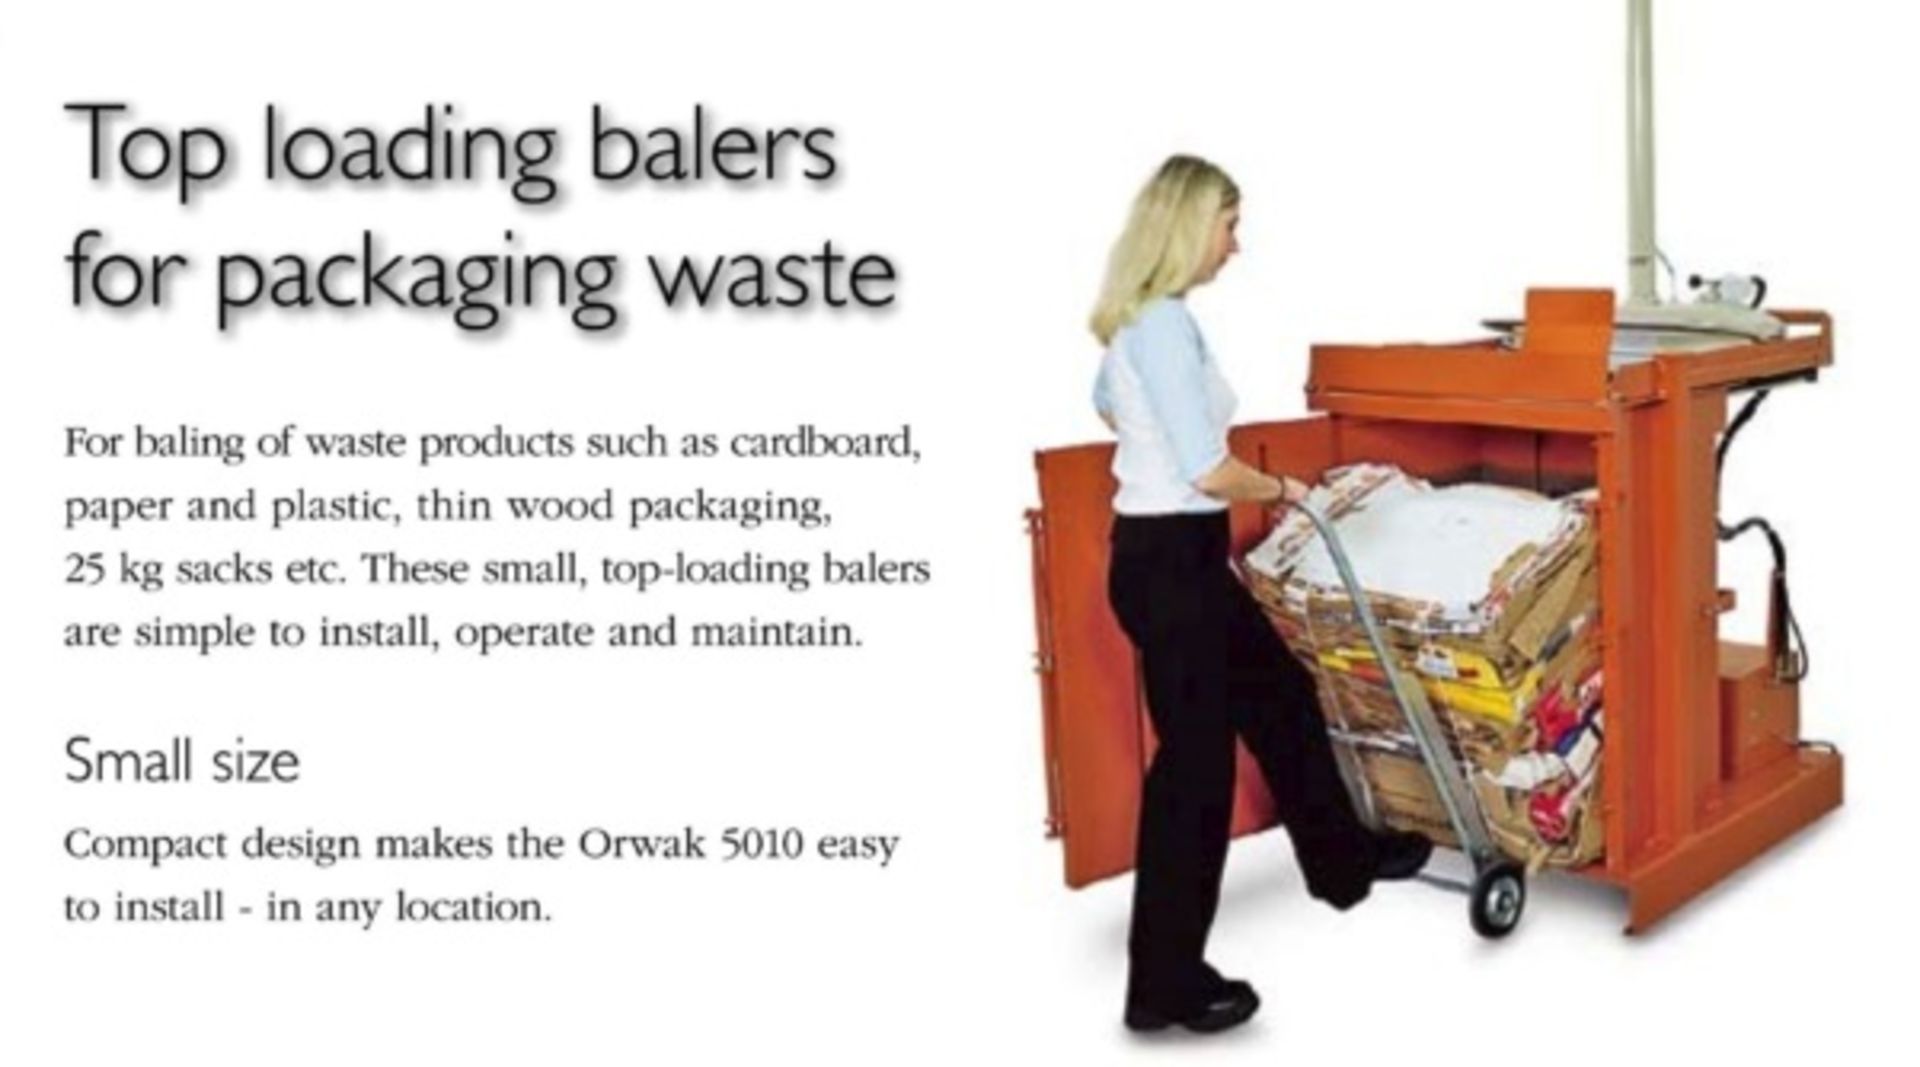 1 x Orwak 5010 Top Loading Baler -  Fully Tested and Working, Very Good Condition - CL011 - - Image 3 of 11